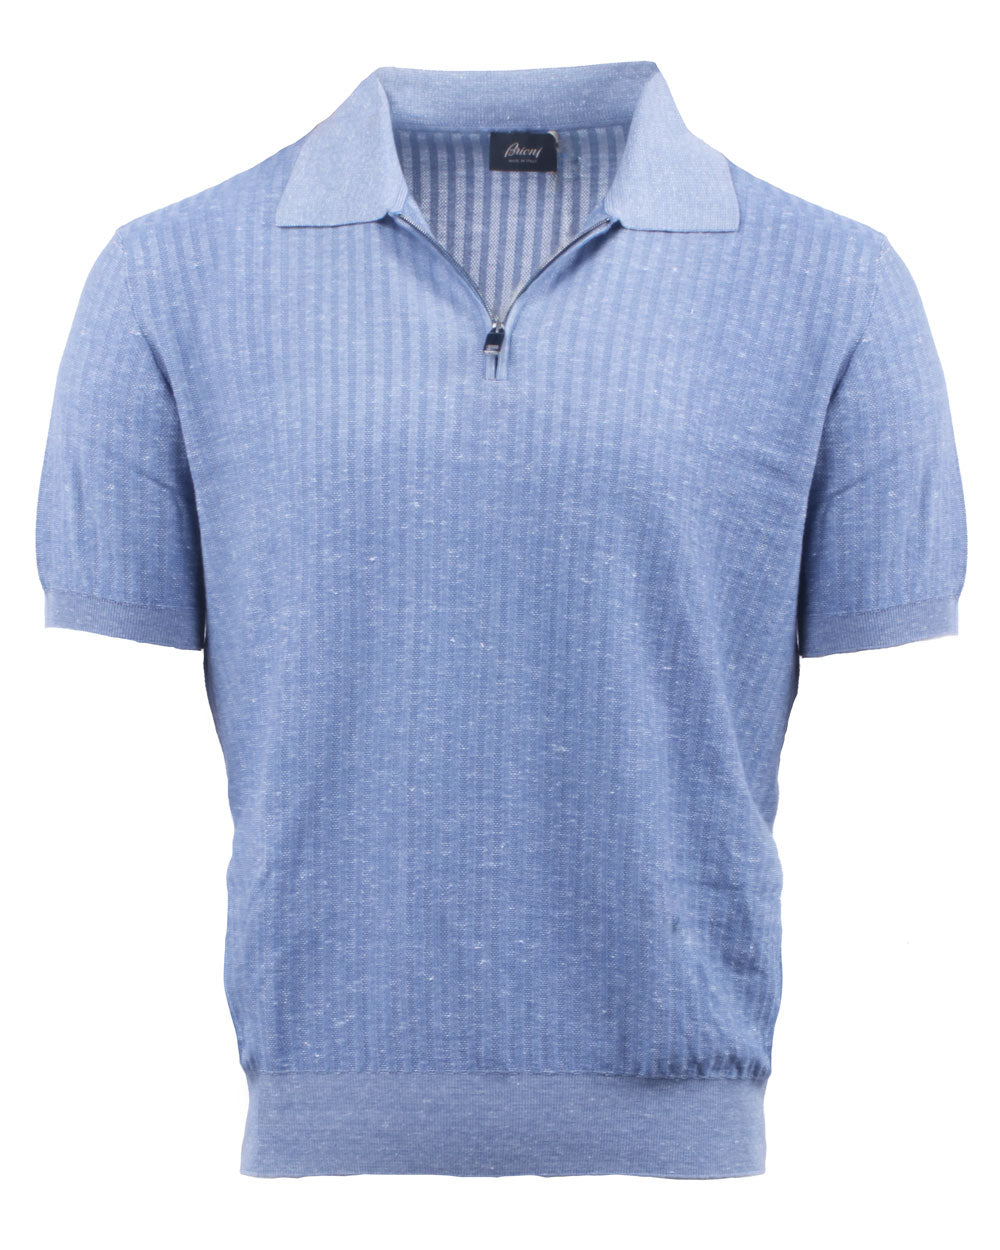 Bluette Concealed Zip Polo